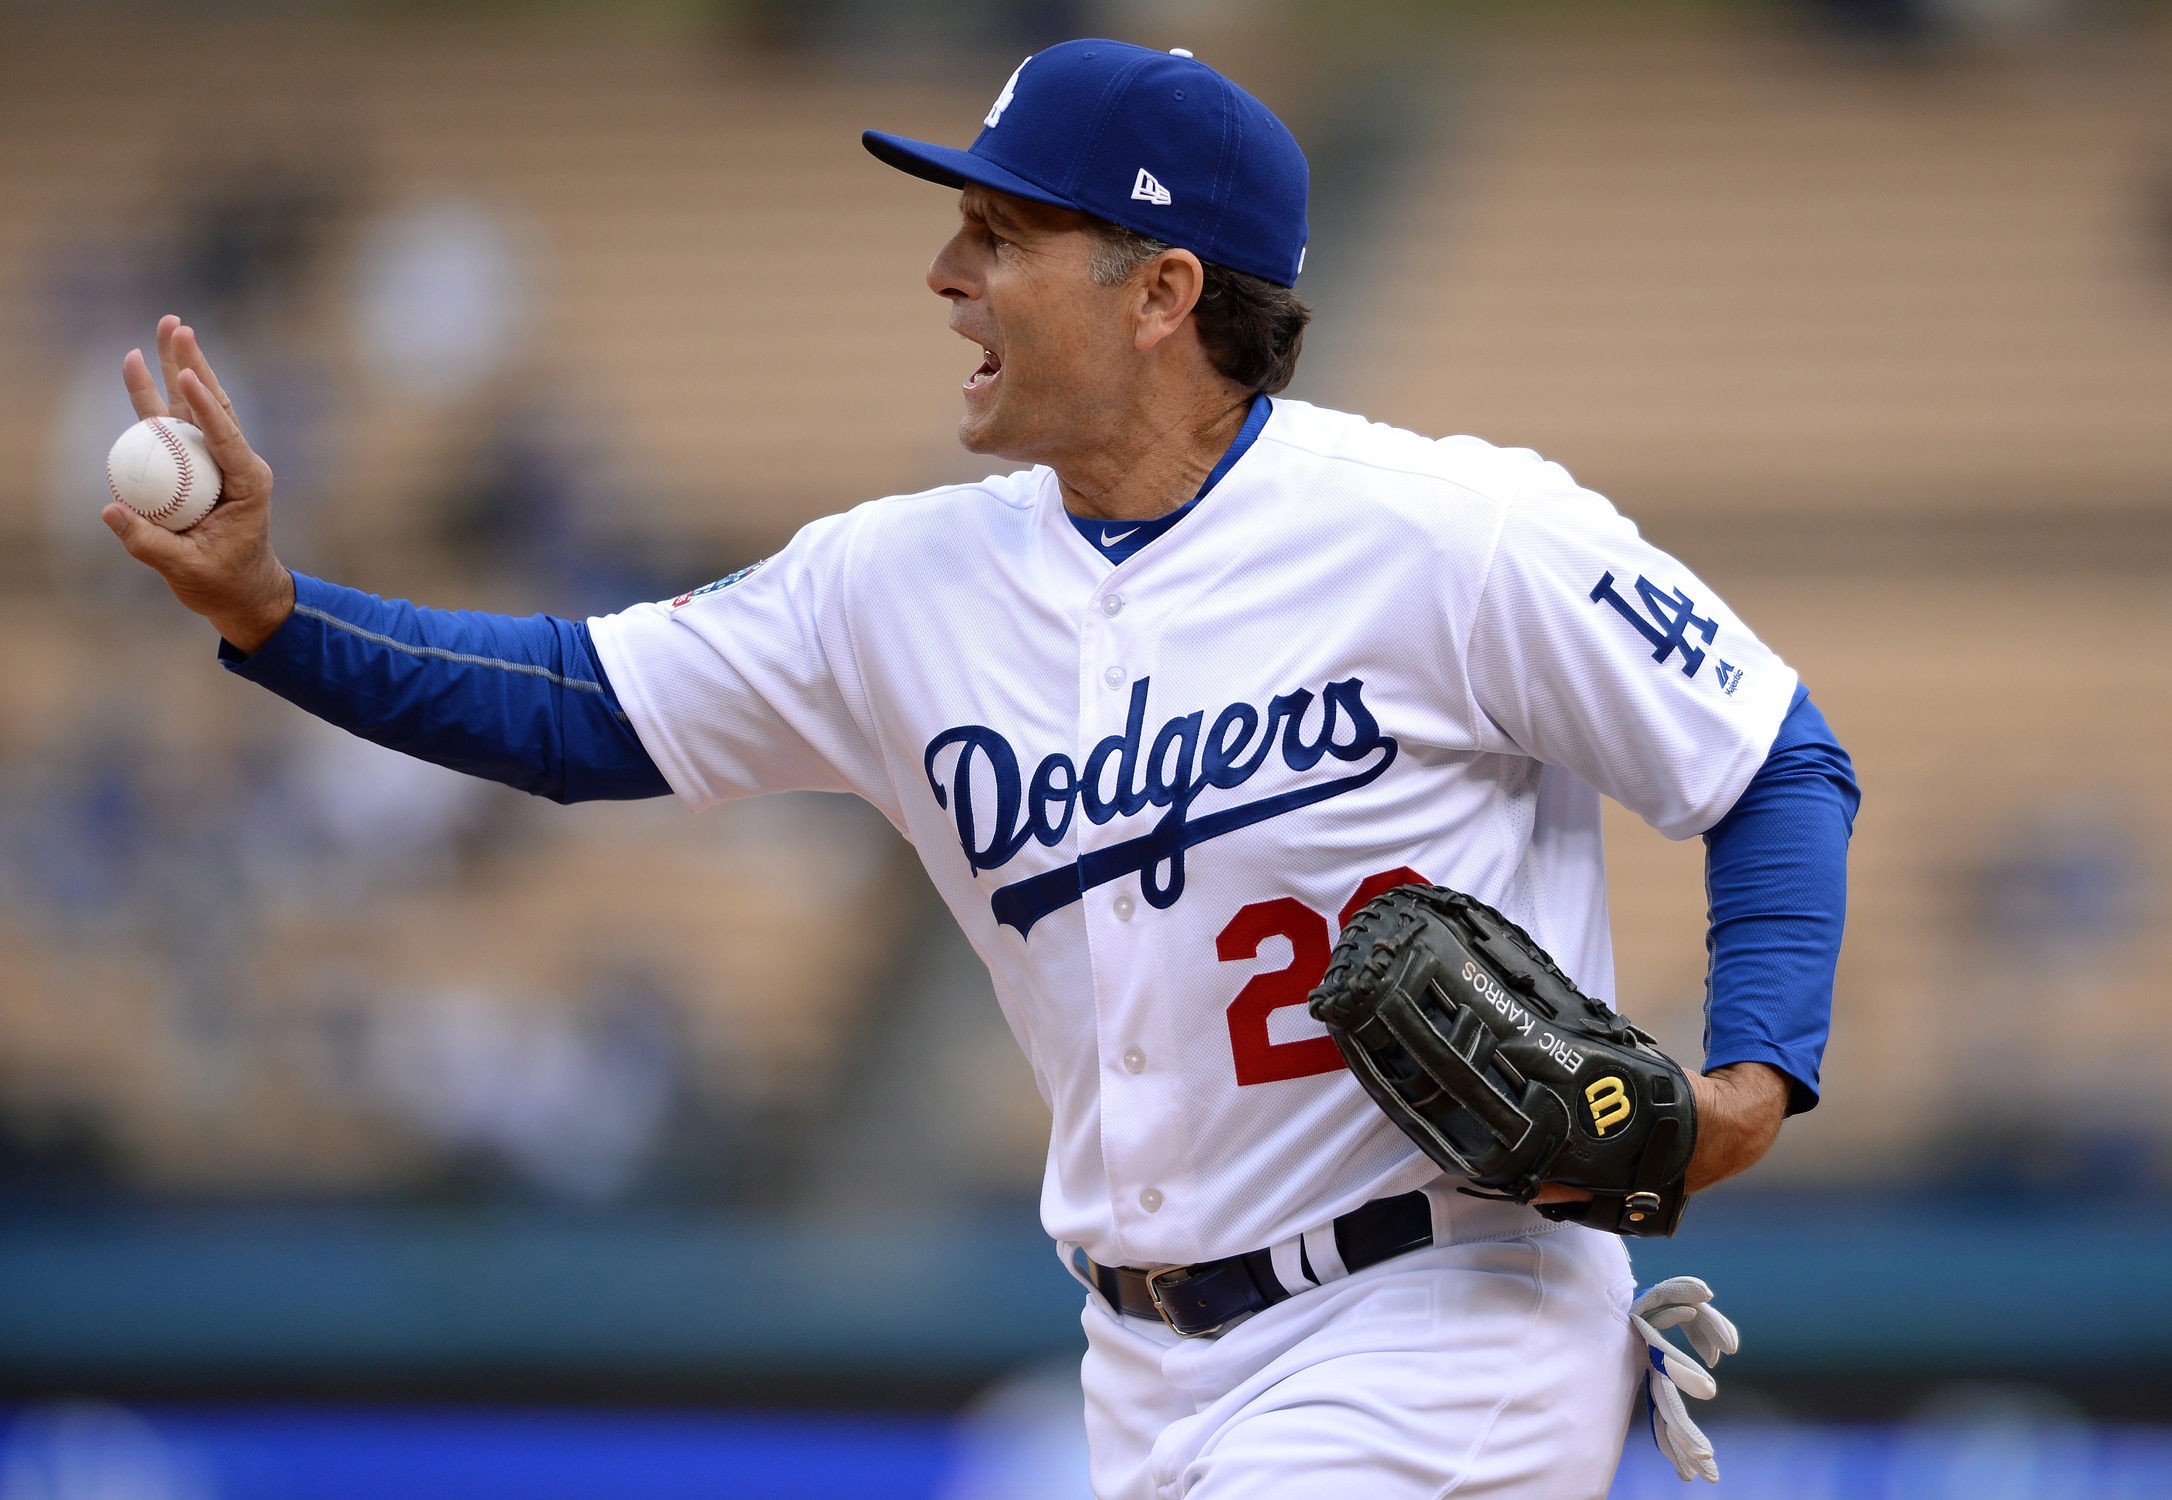 Dodgers: Eric Karros Expects 'Significant Difference' in Next